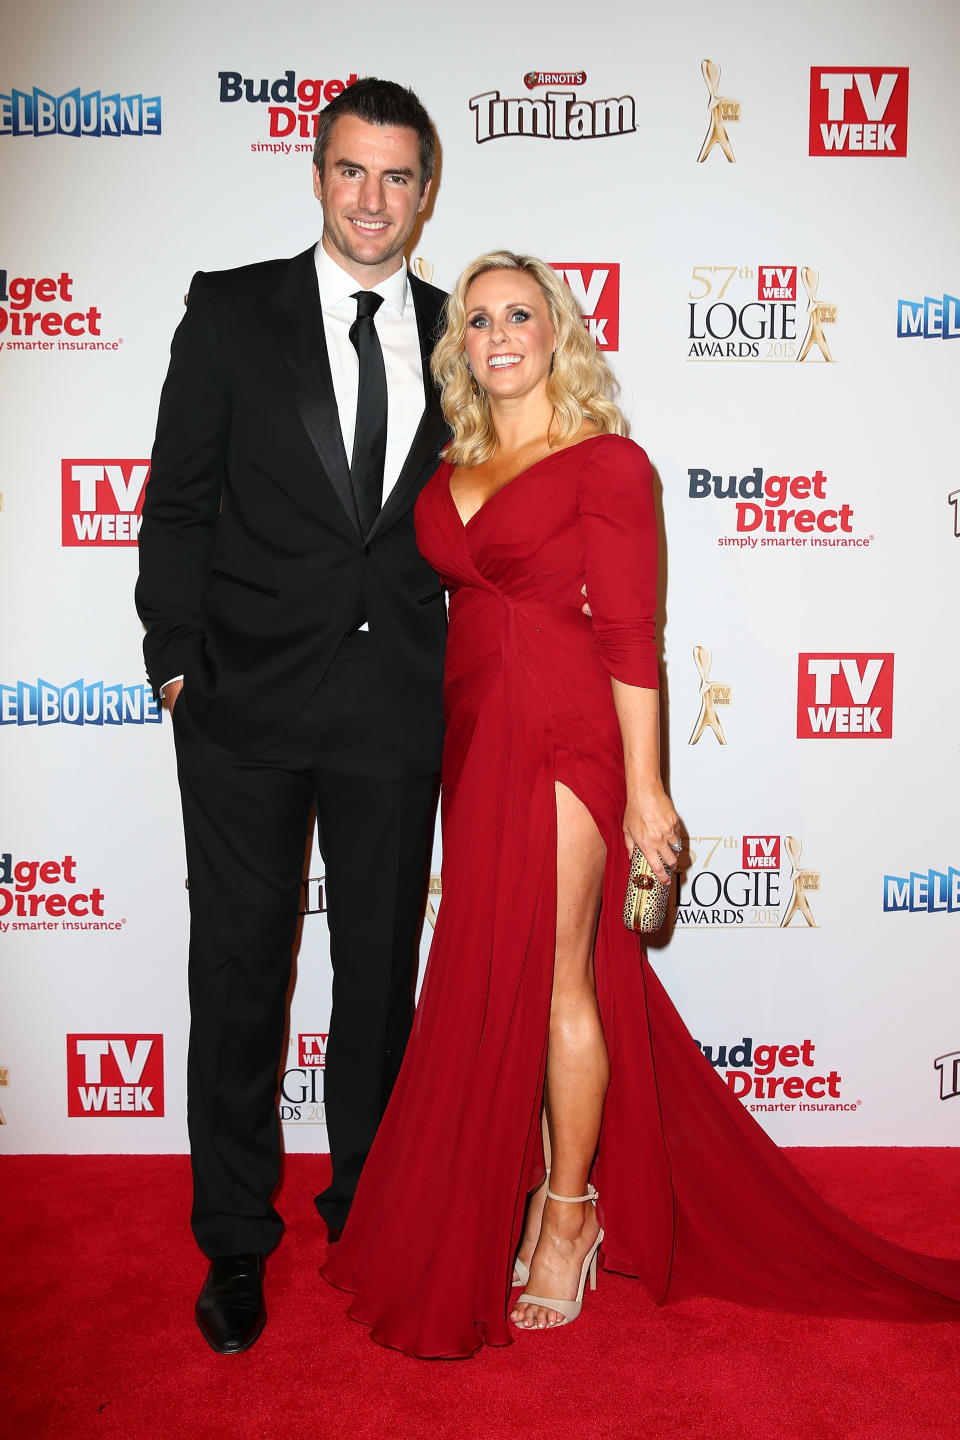 Darren Jolly and Deanne Jolly at the Logies